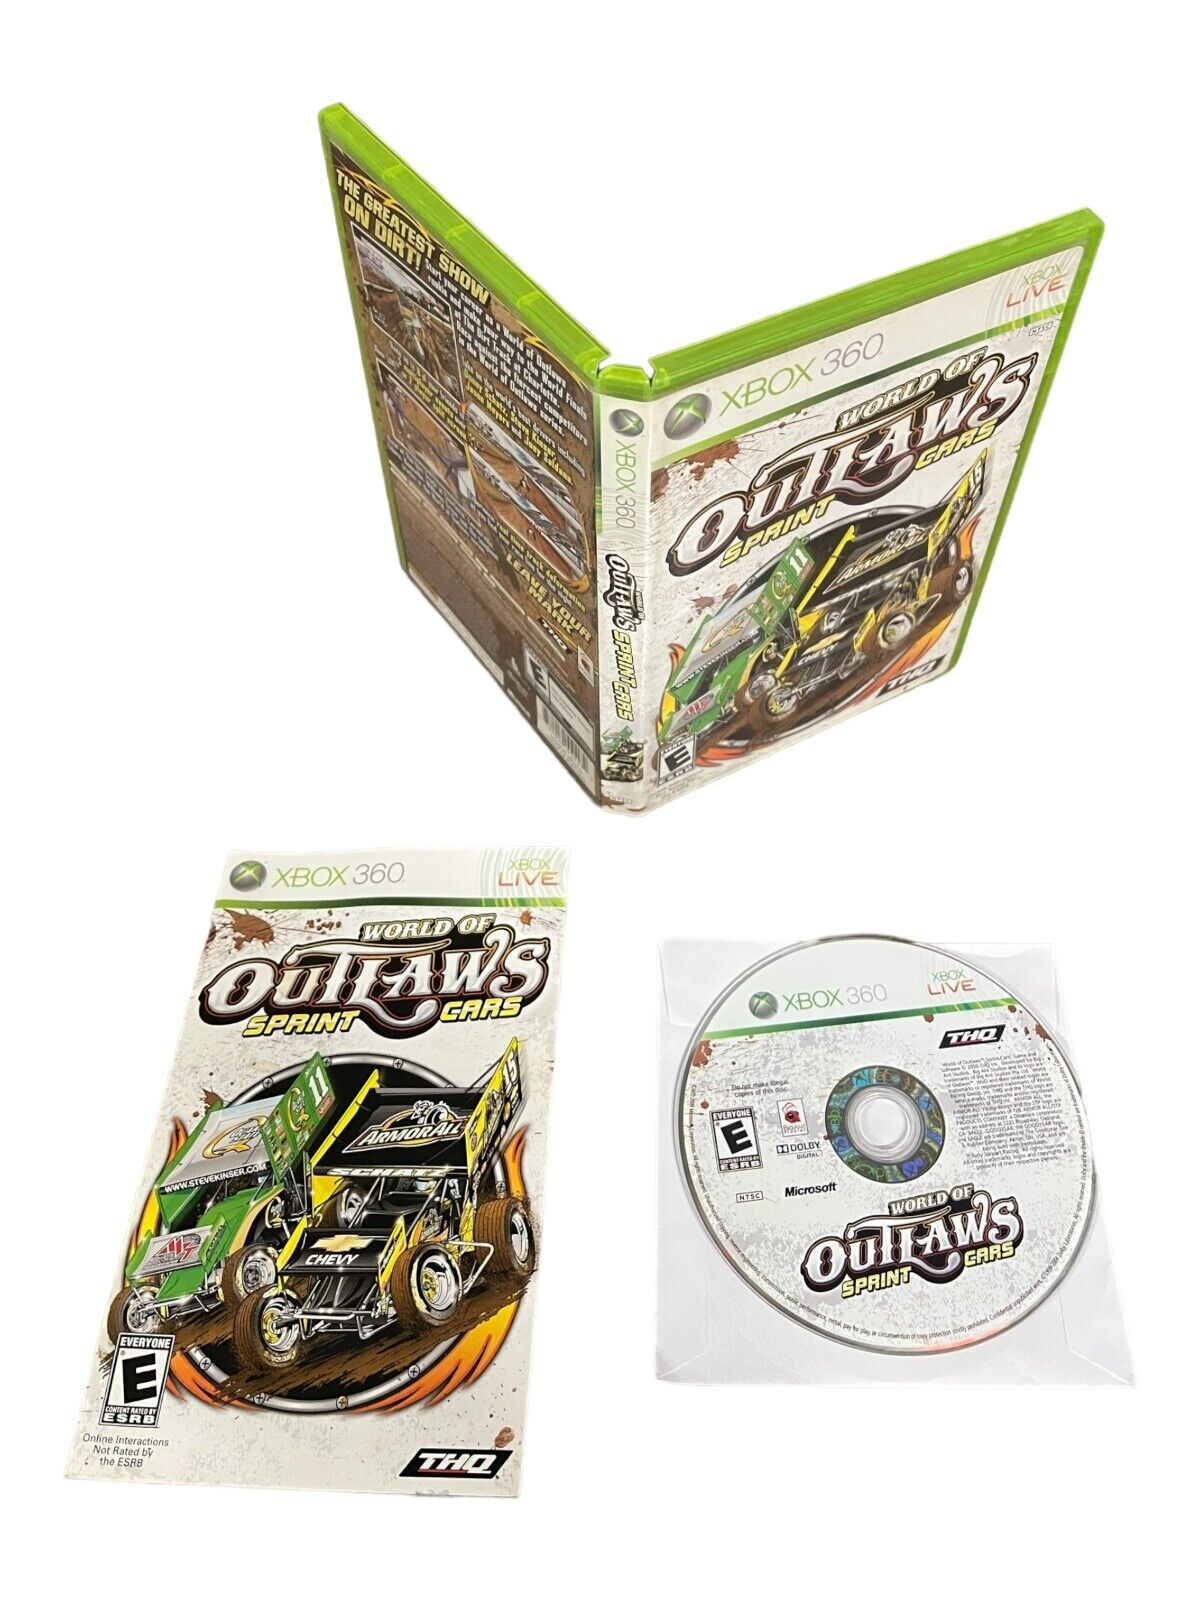 Microsoft Xbox 360 CIB Complete TESTED World of Outlaws: Sprint Cars